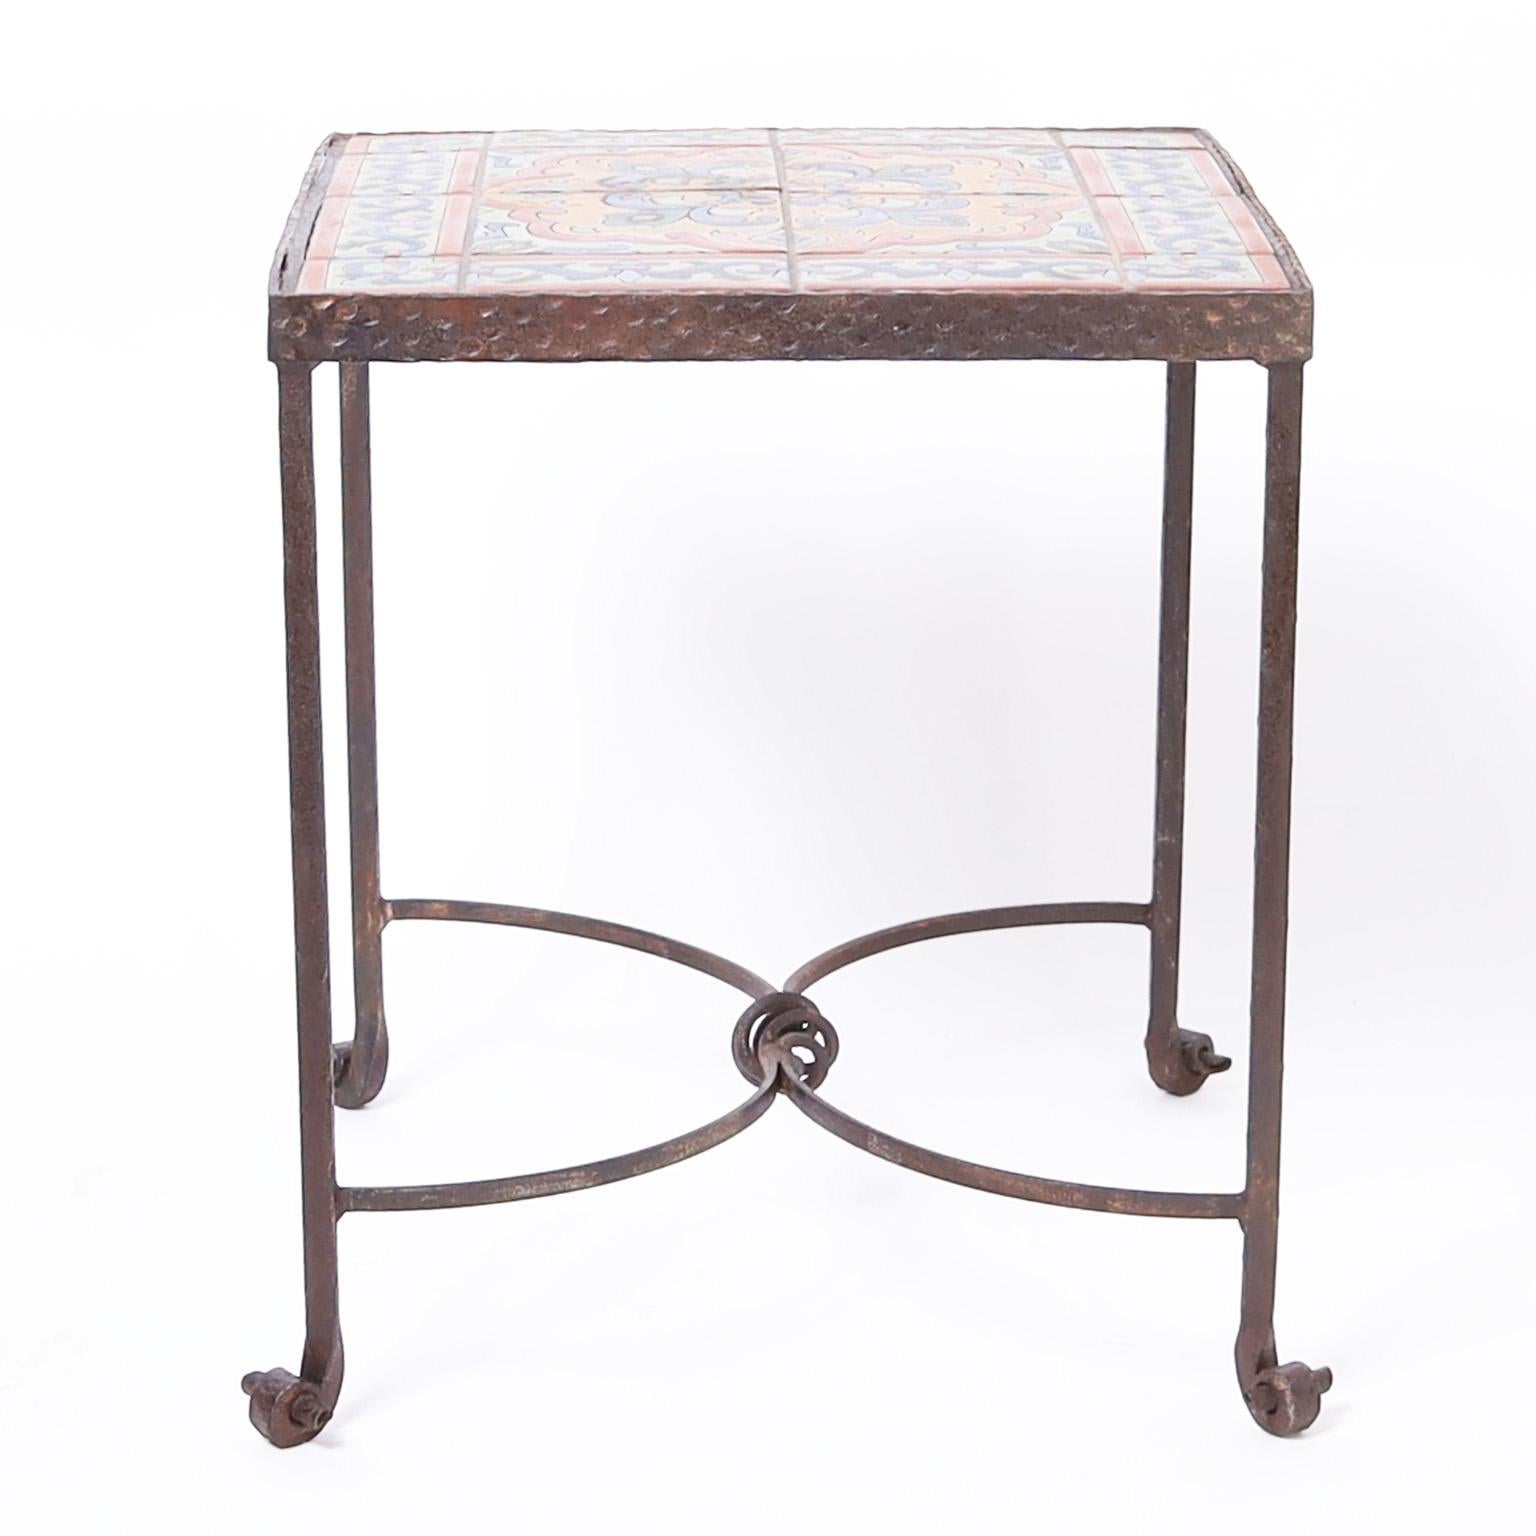 French Provincial Antique French Tile Top Iron Stand or Table For Sale